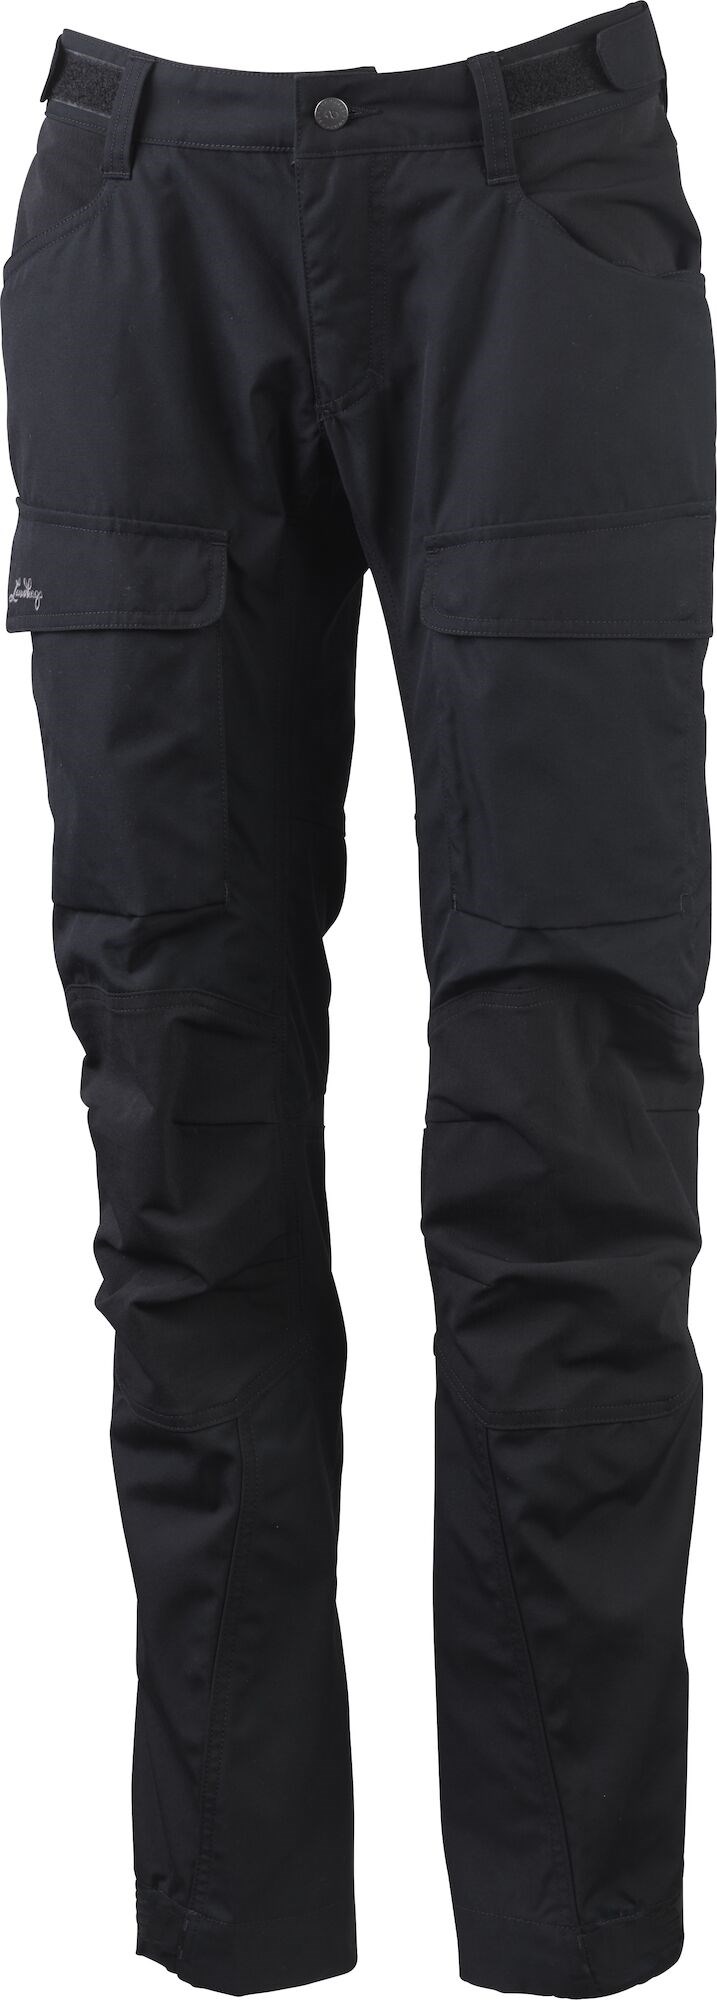 Authentic II Short/Wide Stretch Hybrid Hiking Pants Women